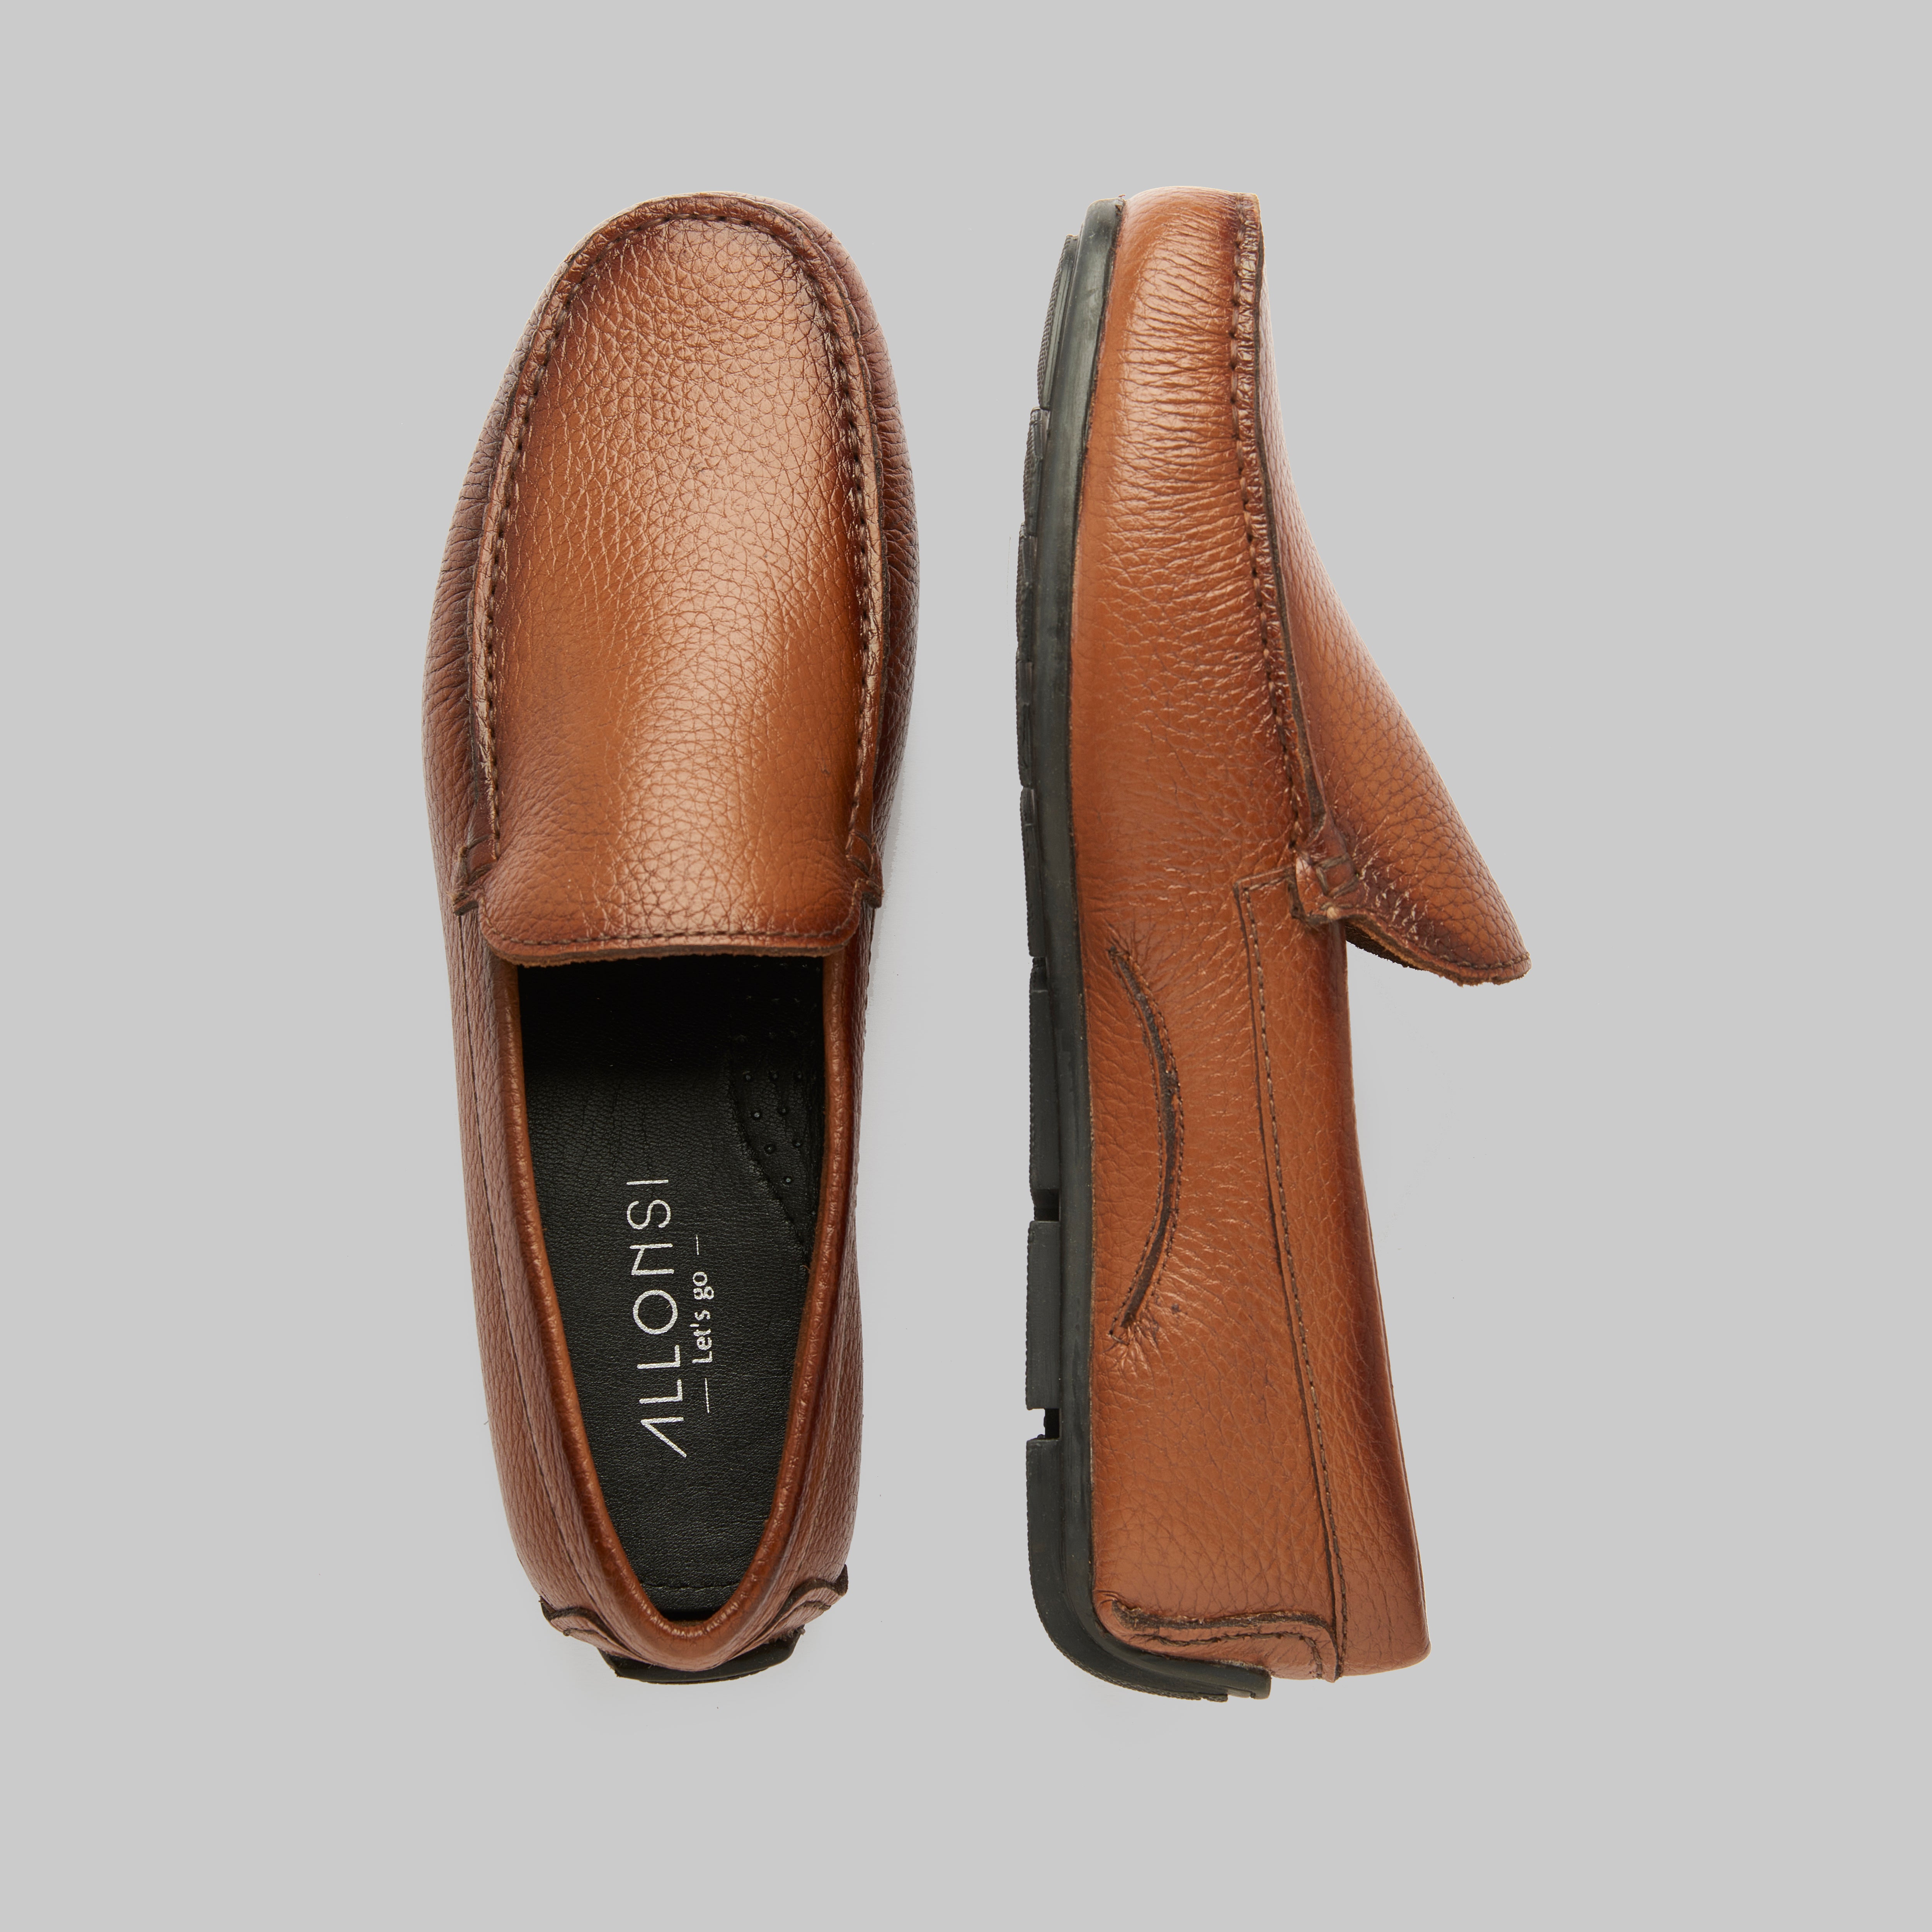 Limber Classic Venetian Driving Loafers